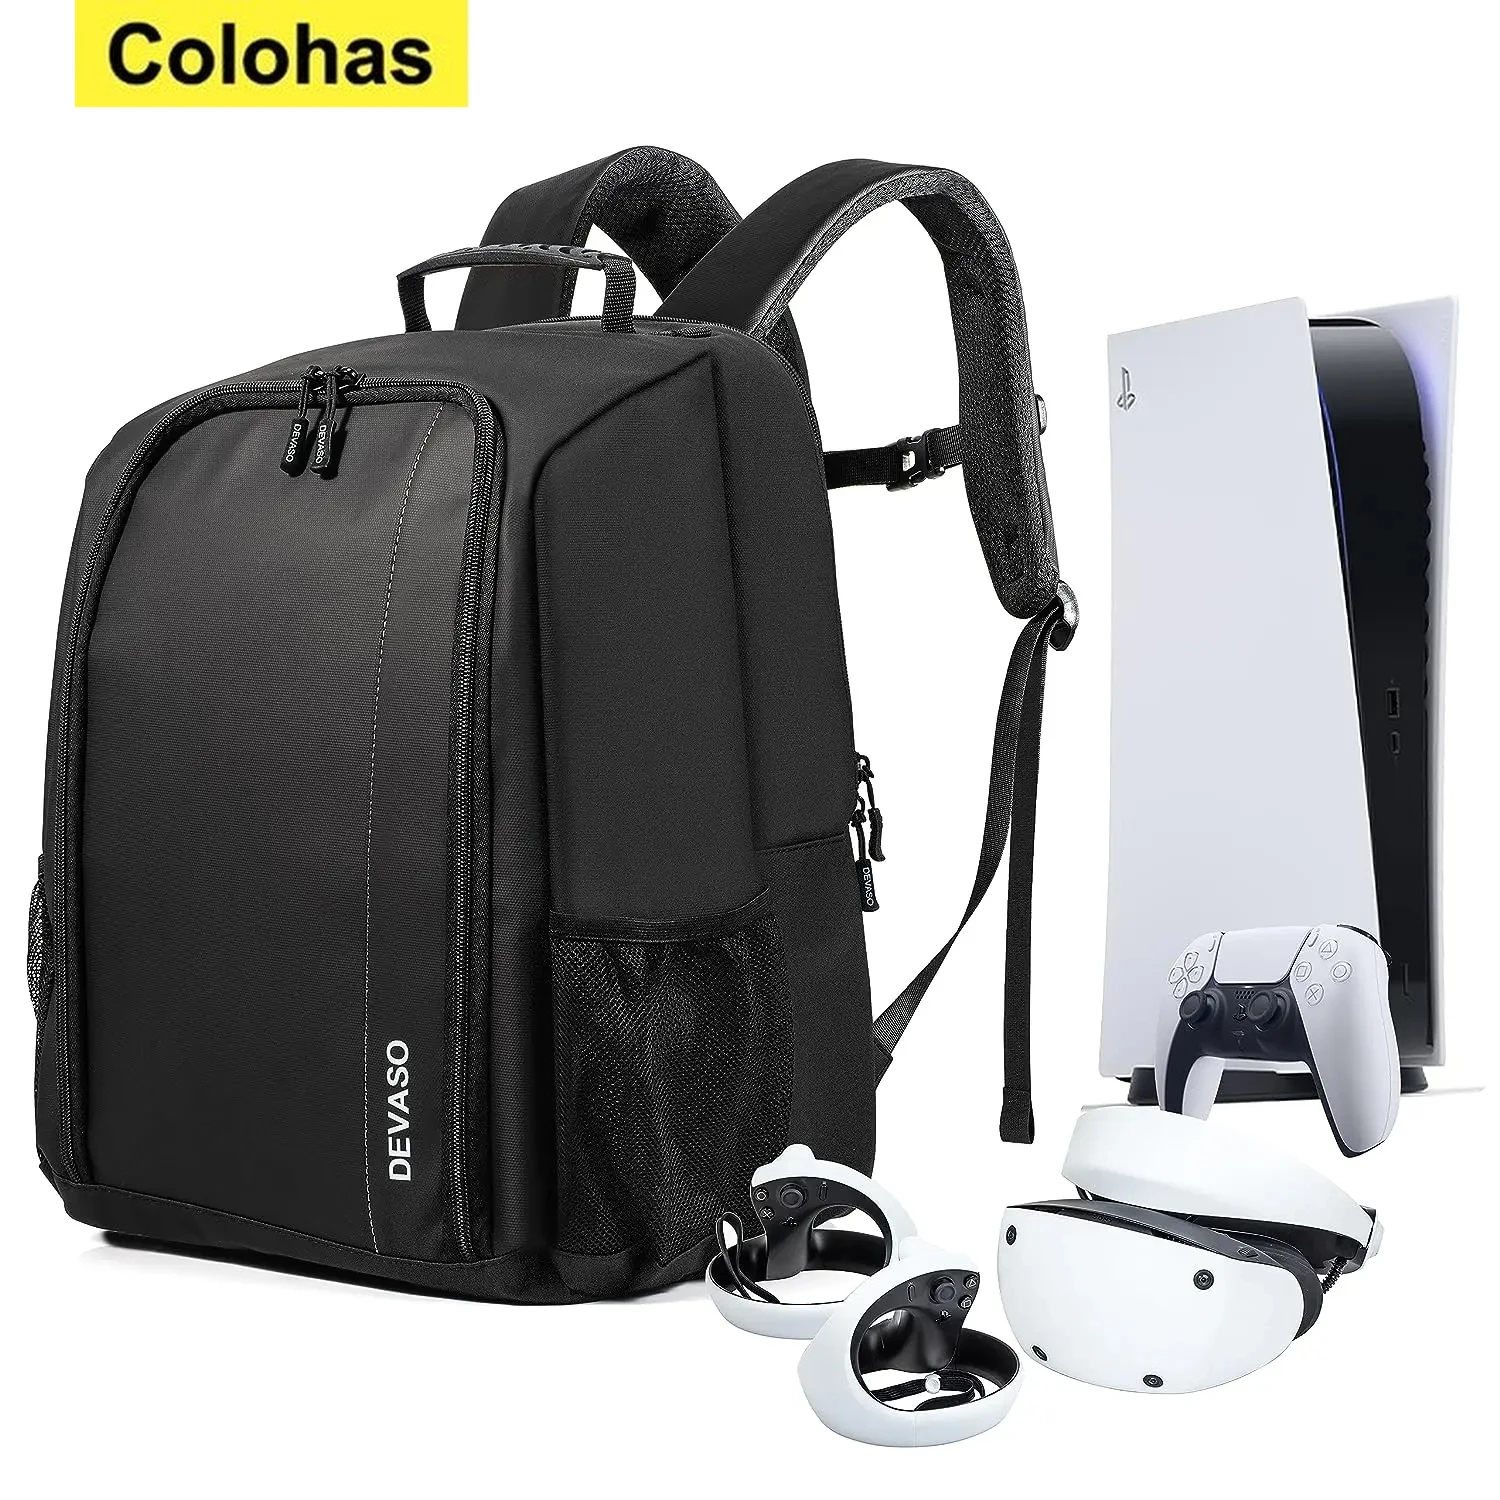 

Gaming Console Backpack for PS5 & PSVR2, Large Capacity Travel Storage Bag for PS5 Console, PS VR2, Controller, Game Accessories